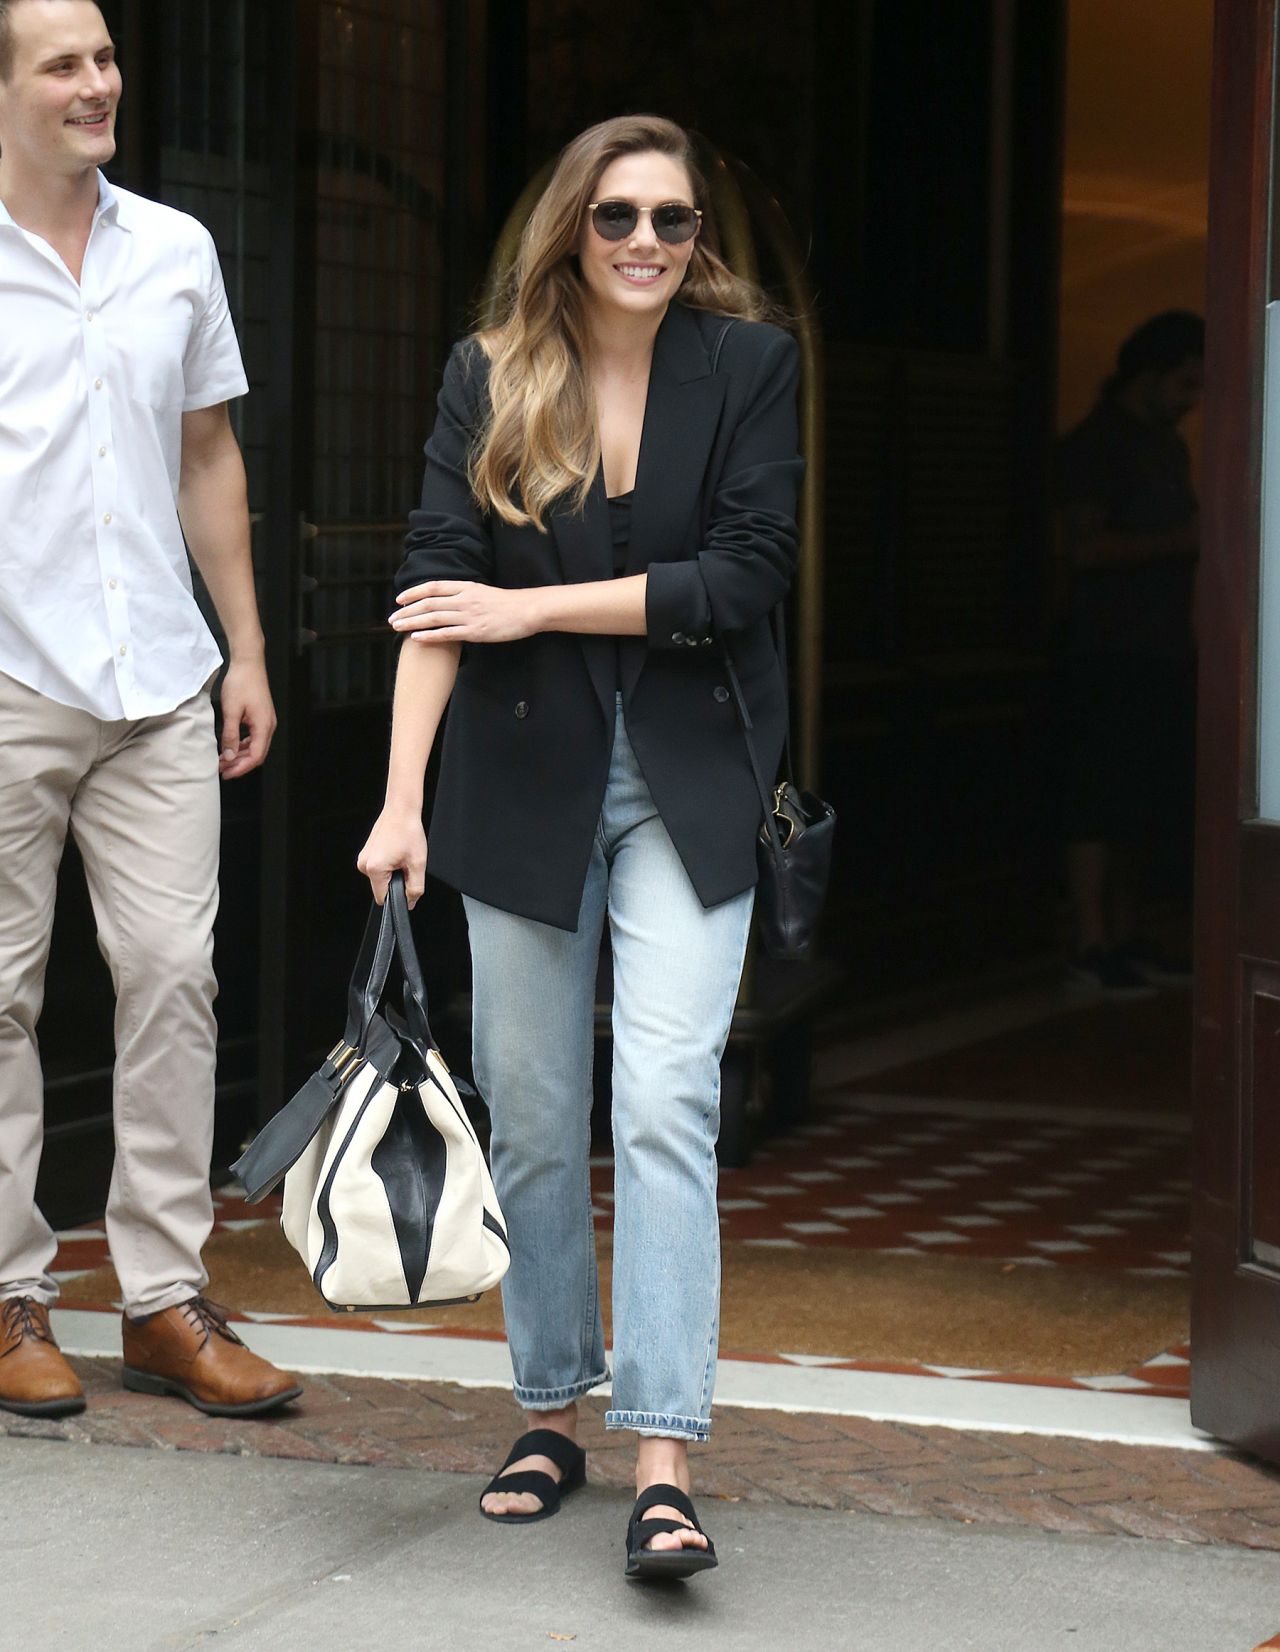 Elizabeth Olsen in Casual Outfit - NYC 09/07/2018.